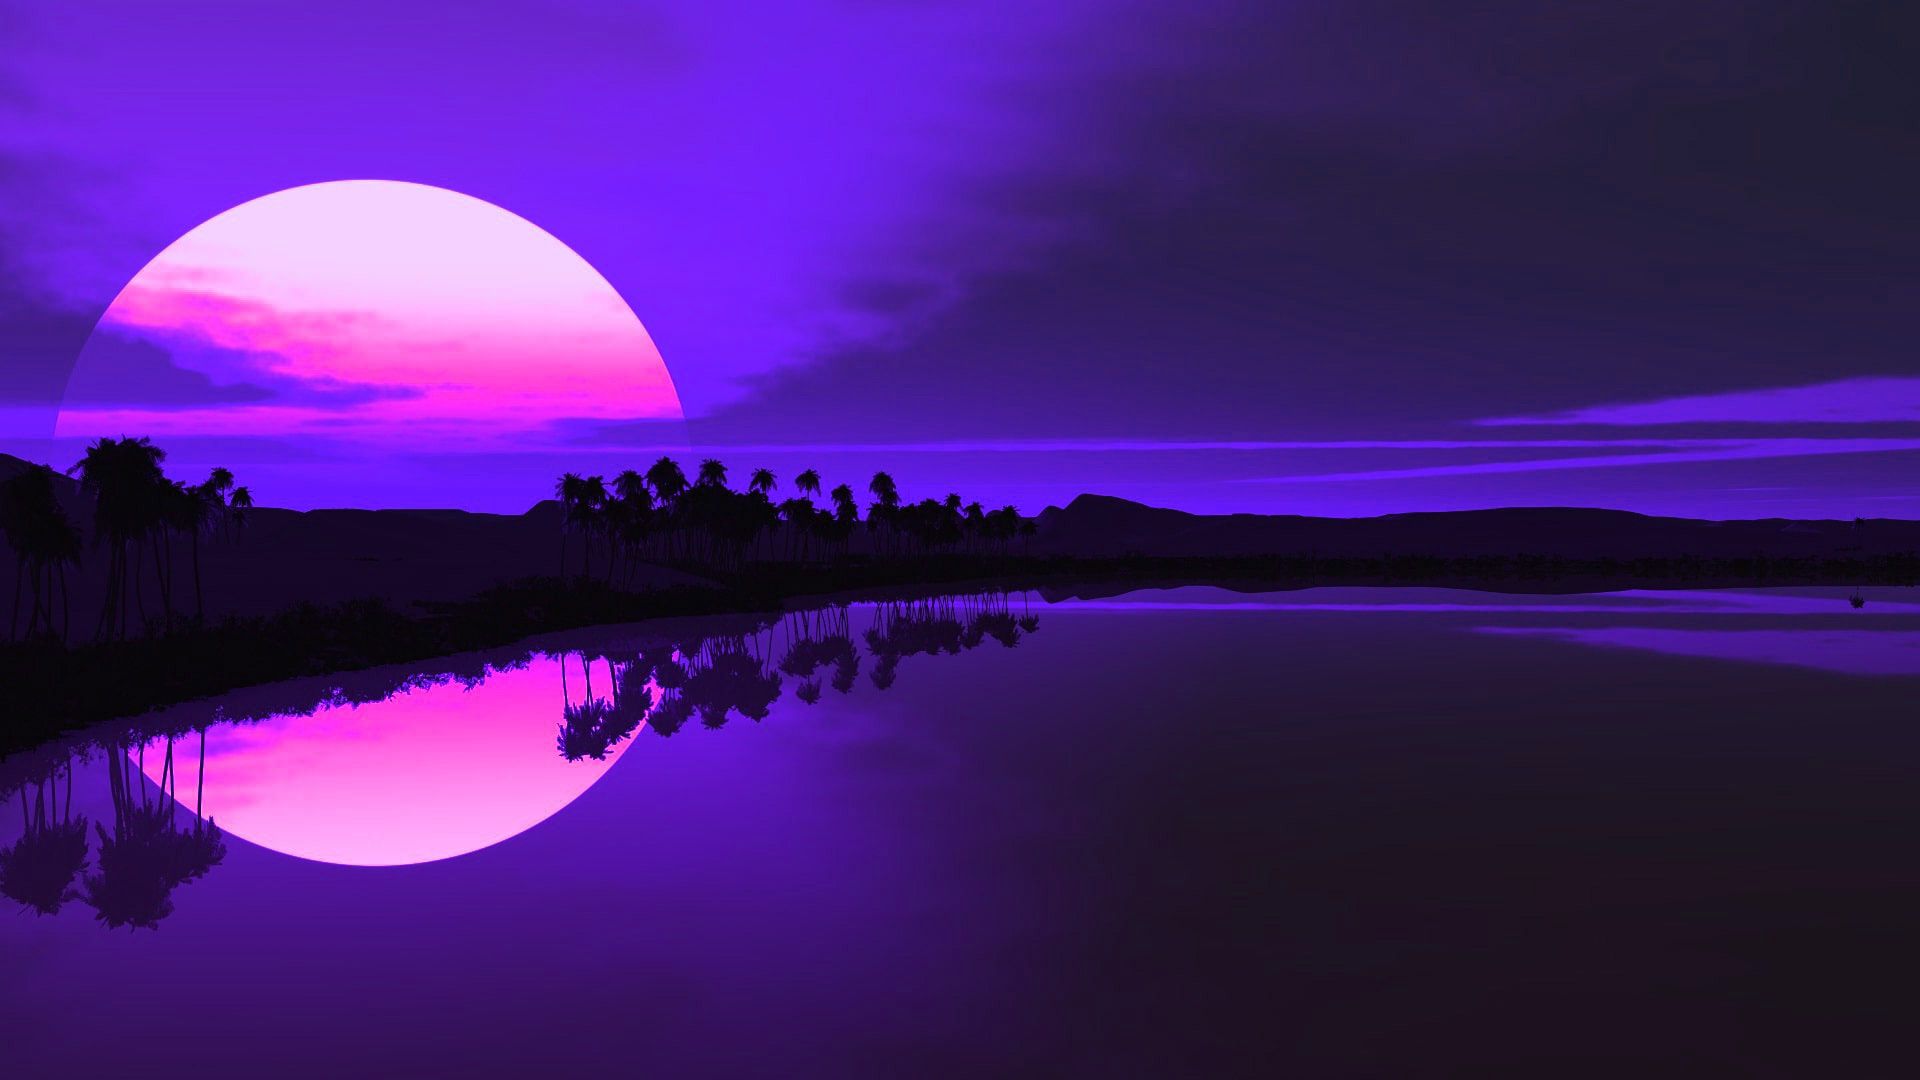 A beautiful purple sunset with a pink moon rising over a tropical island - Sunset